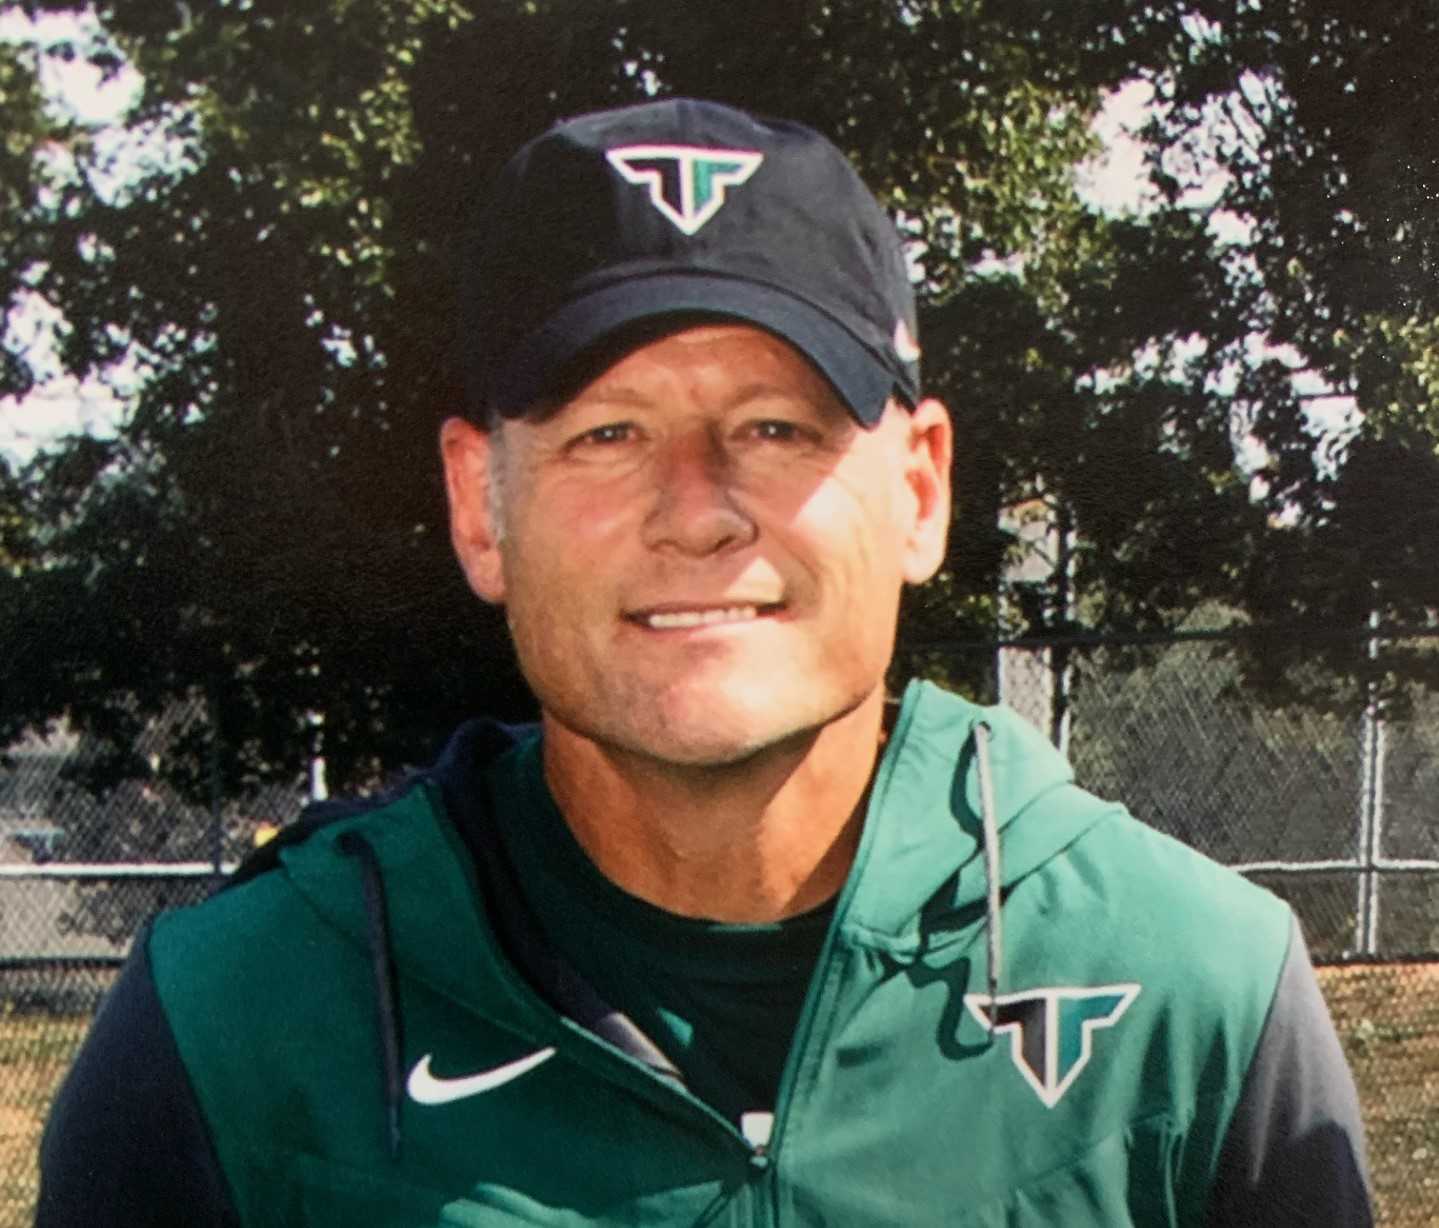 New Tigard coach Ken Feist played football and baseball at Banks, where he graduated in 1987, and Portland State.